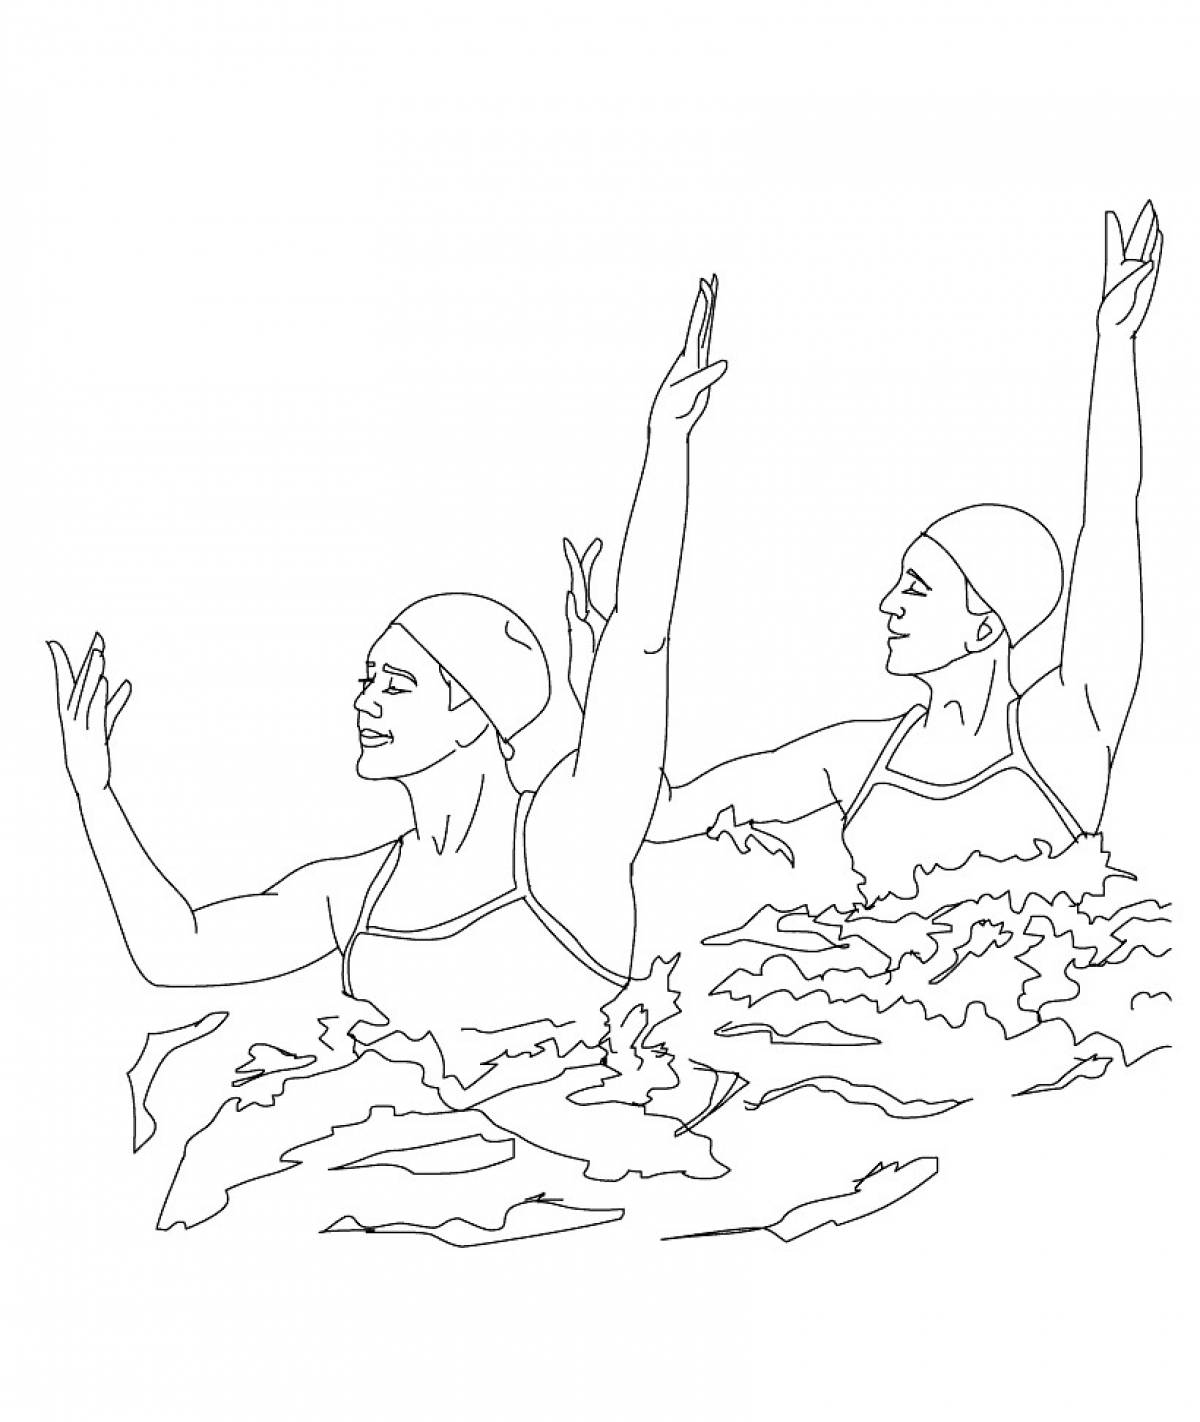 Synchronized swimming duo